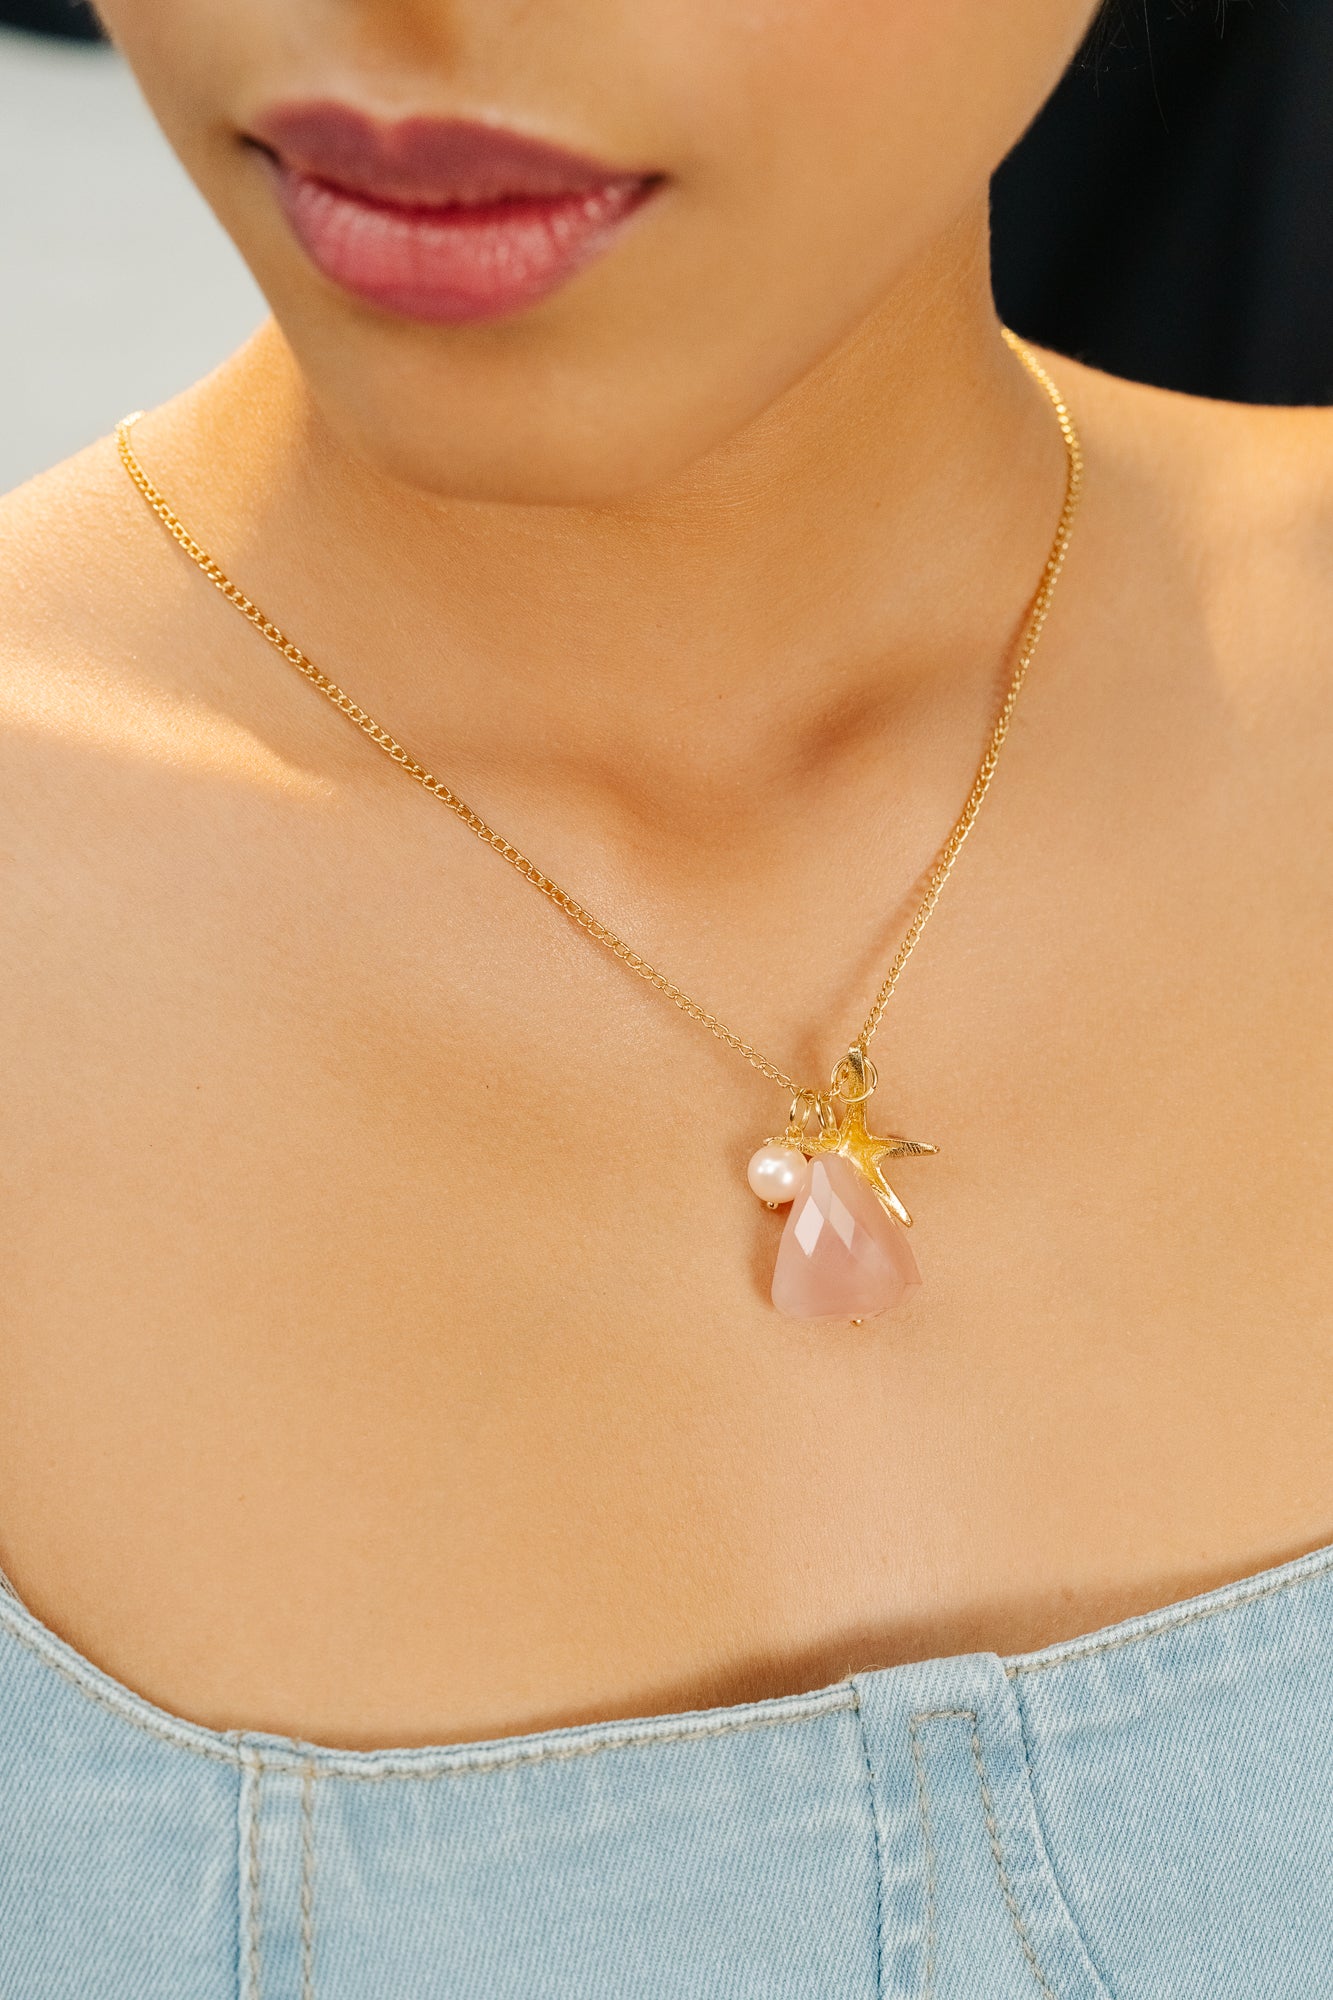 ROSE QUARTZ NATURAL STONE NECKLACE WITH STARFISH & PEARL CHARM